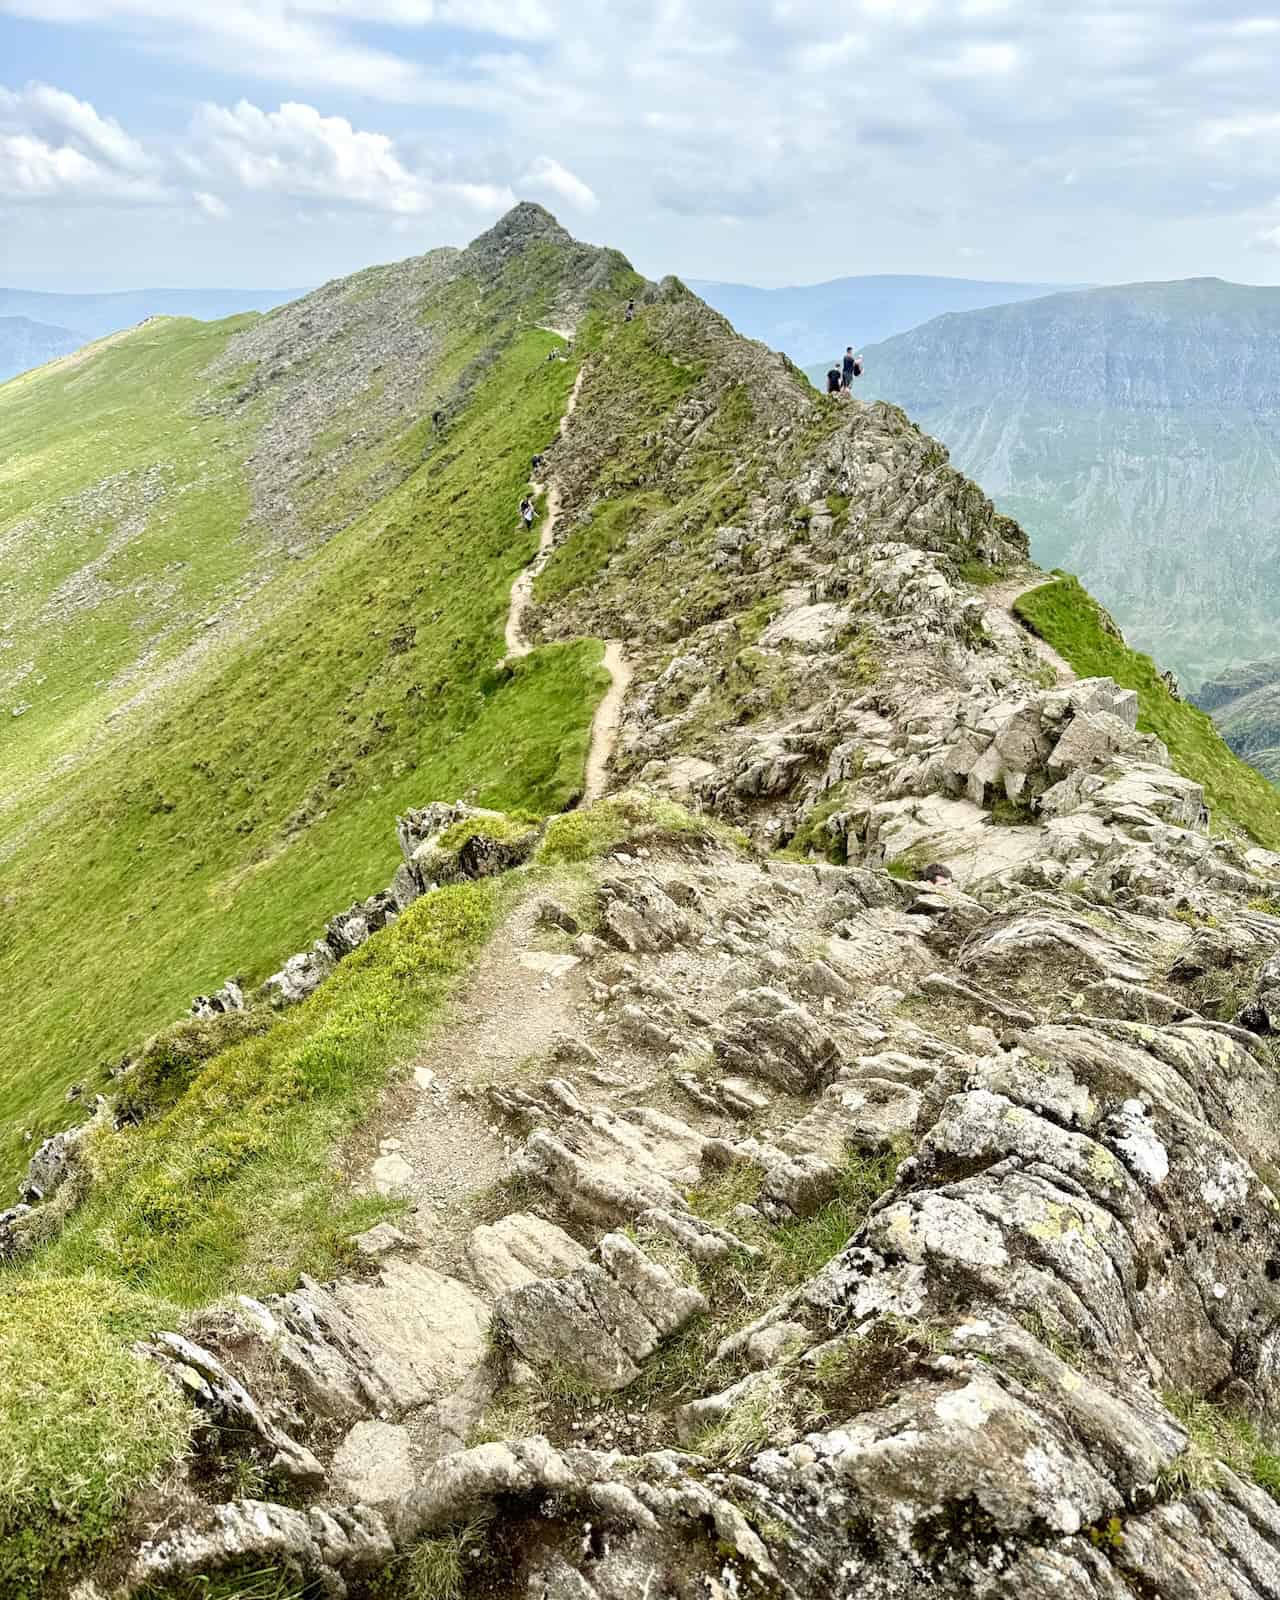 At the midpoint of Striding Edge, there is a convenient lower path for those who prefer not to cross the highest points. The diverse options make Helvellyn via Striding Edge accessible to many hikers.